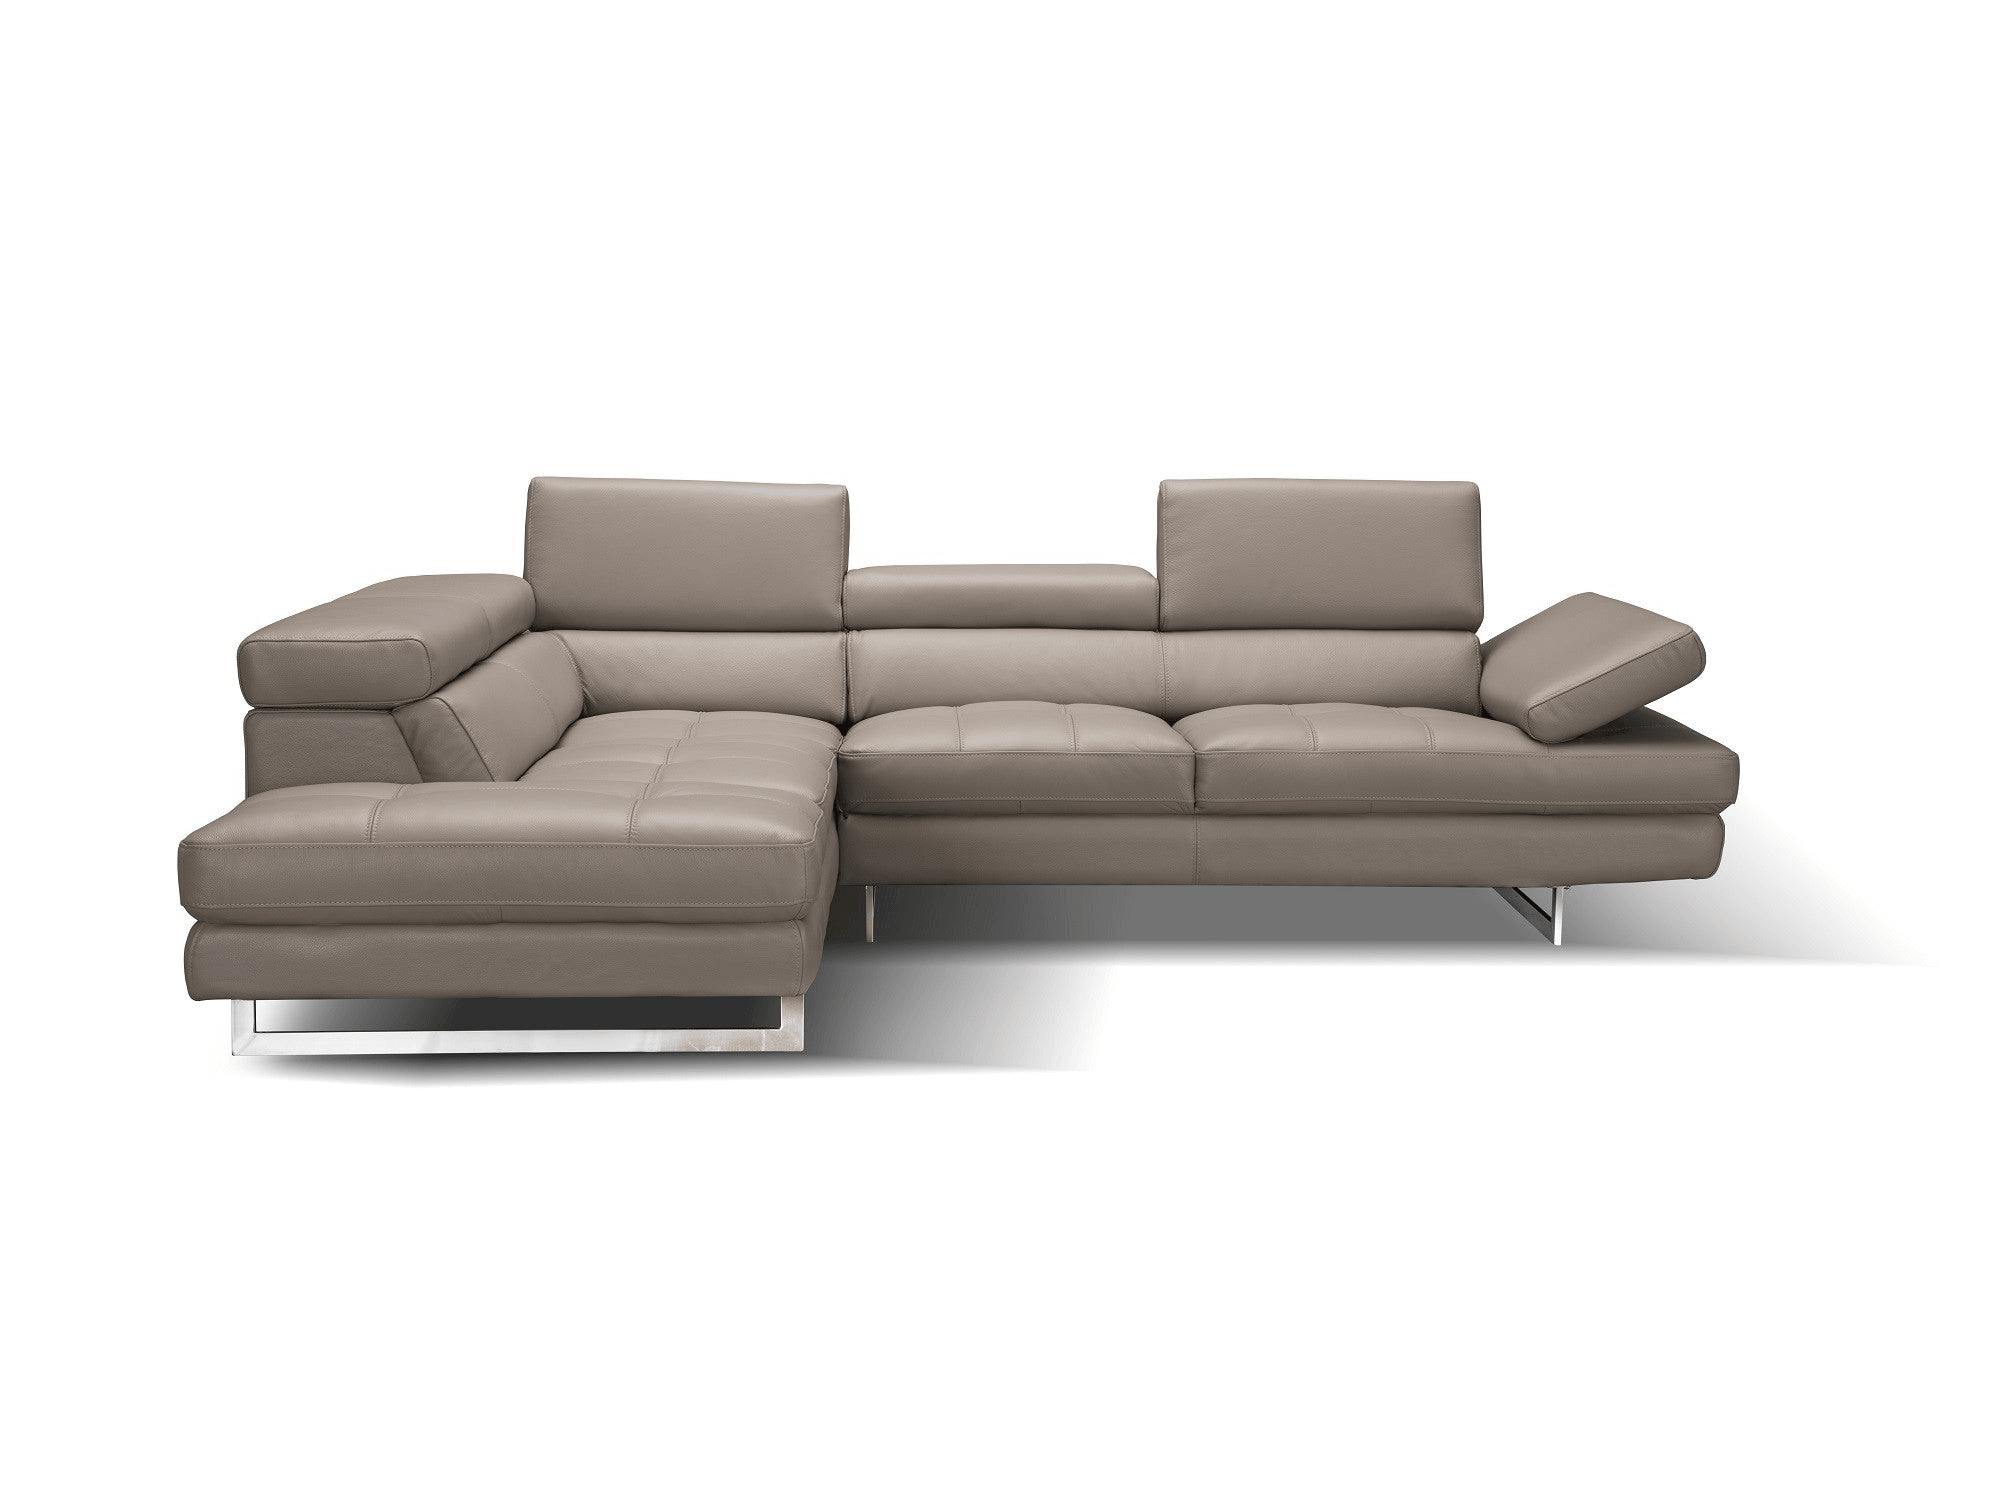 Modernology Italian Leather Sectional in Peanut - Euro Living Furniture